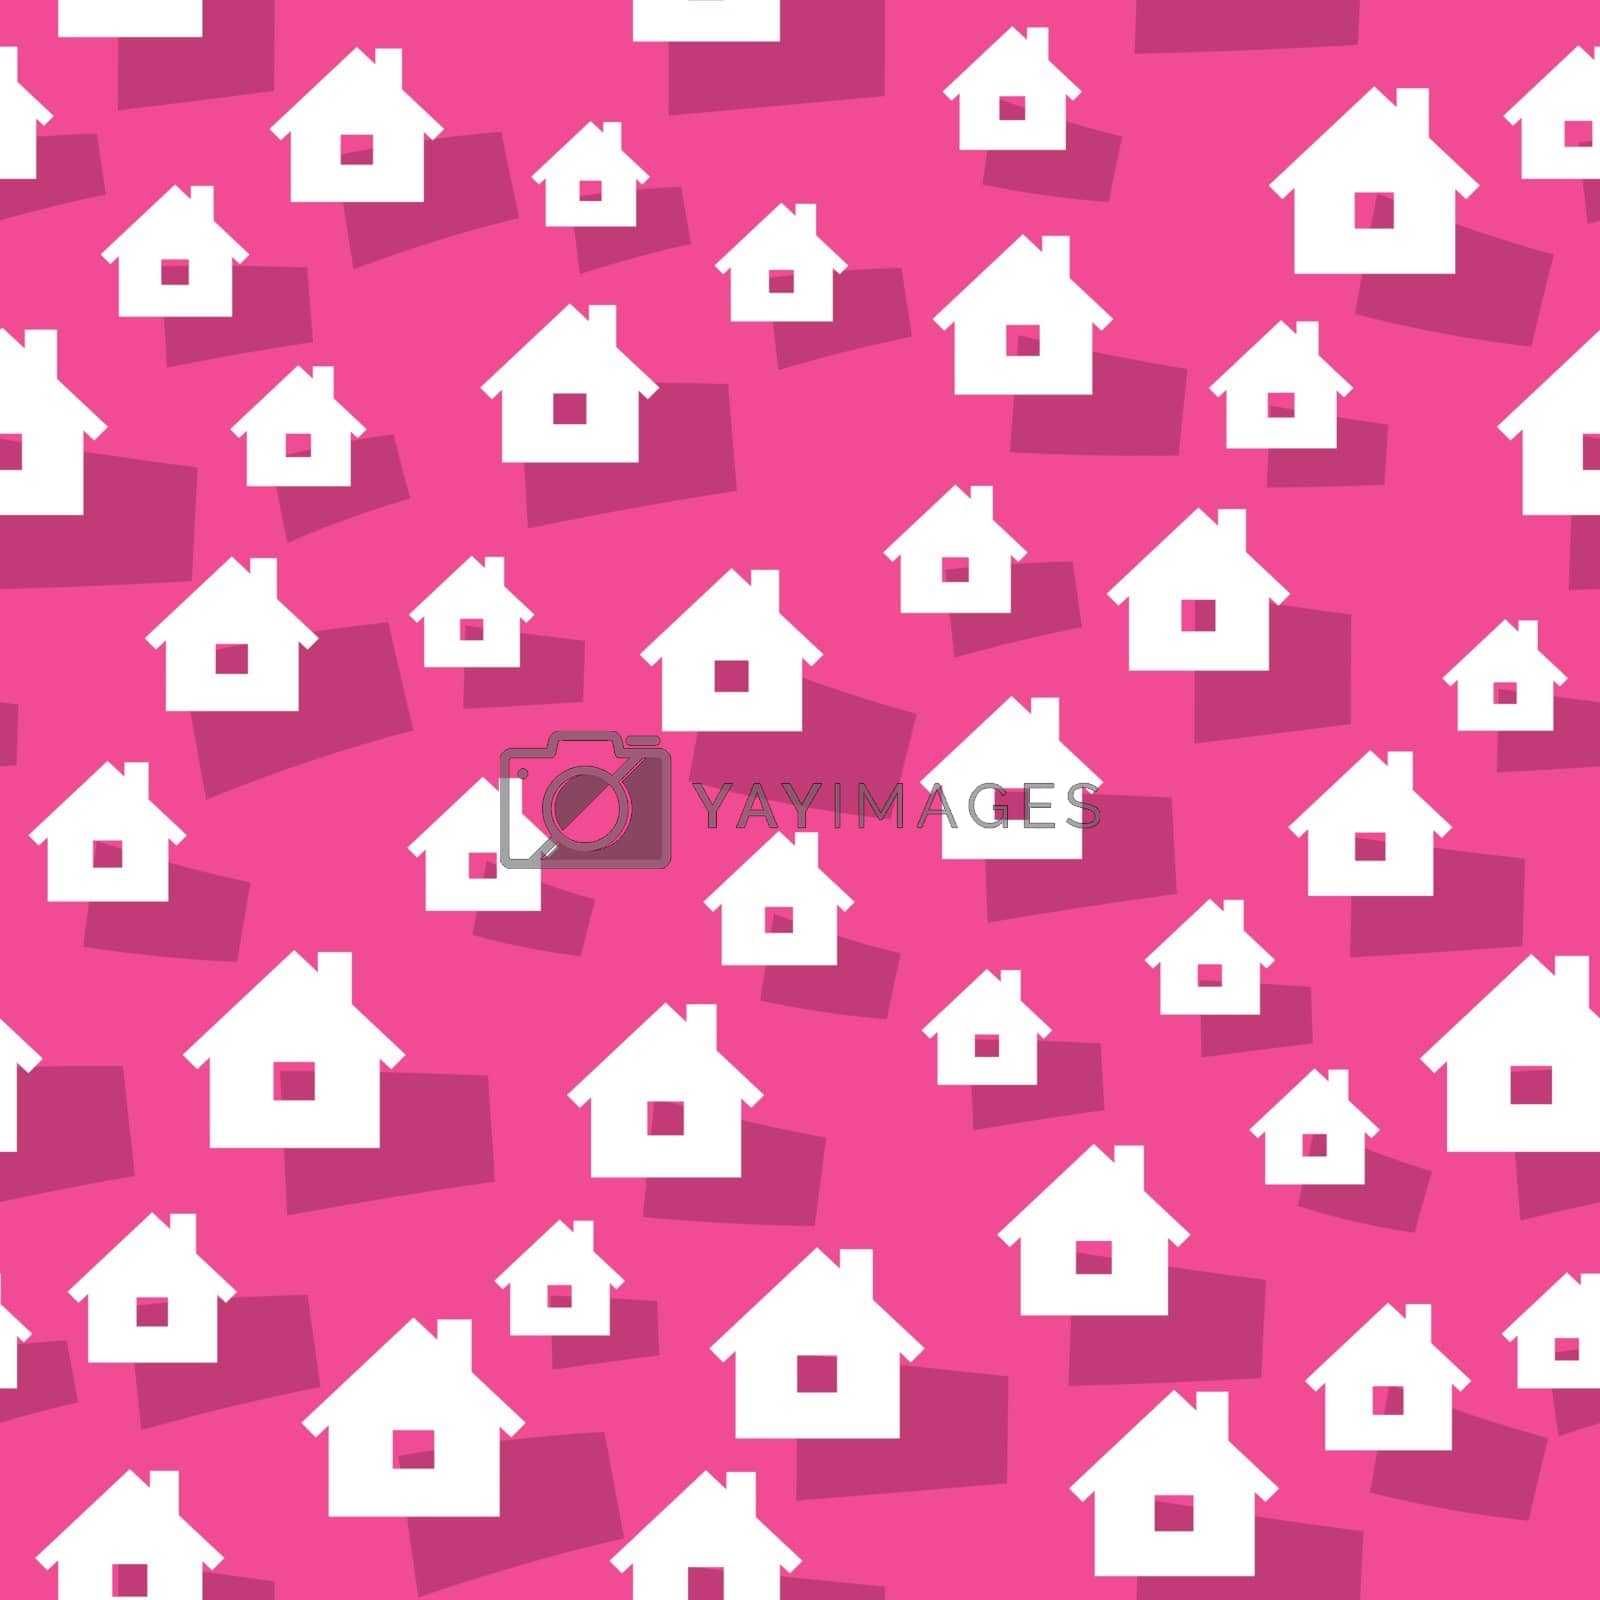 Royalty free image of the house background by madtom